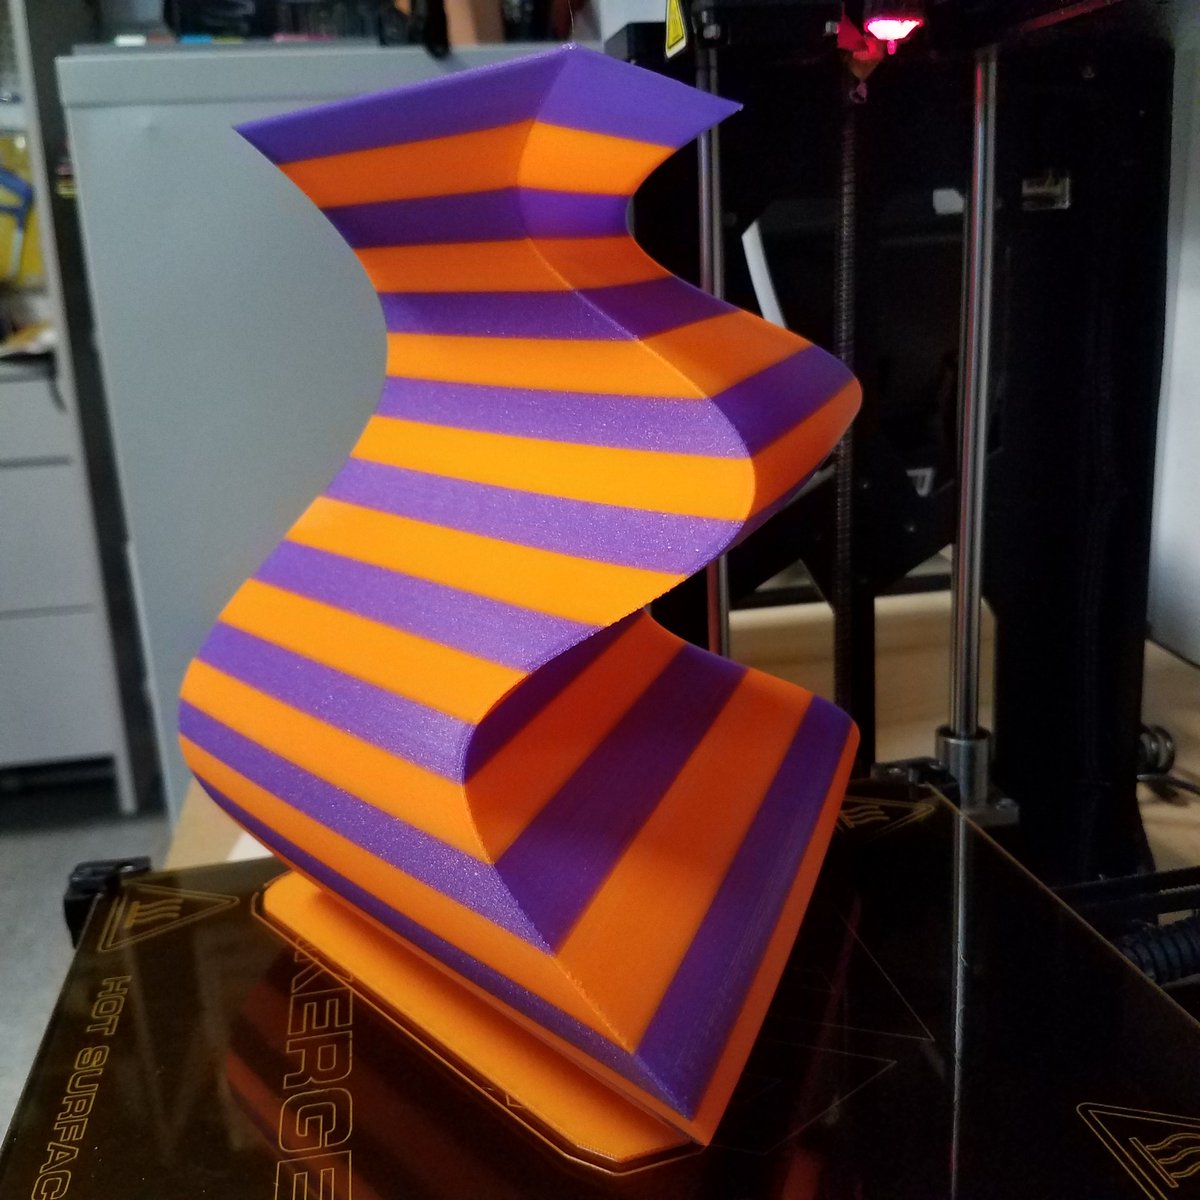 Done! I wasn't sure if I could pull this off without supports. I debated several different options within my slicer along the way. Should have tagged  @Simplify3D too!It's hollow. Hopefully it won't fall apart taking it off the bed and raft... #3DPrinting